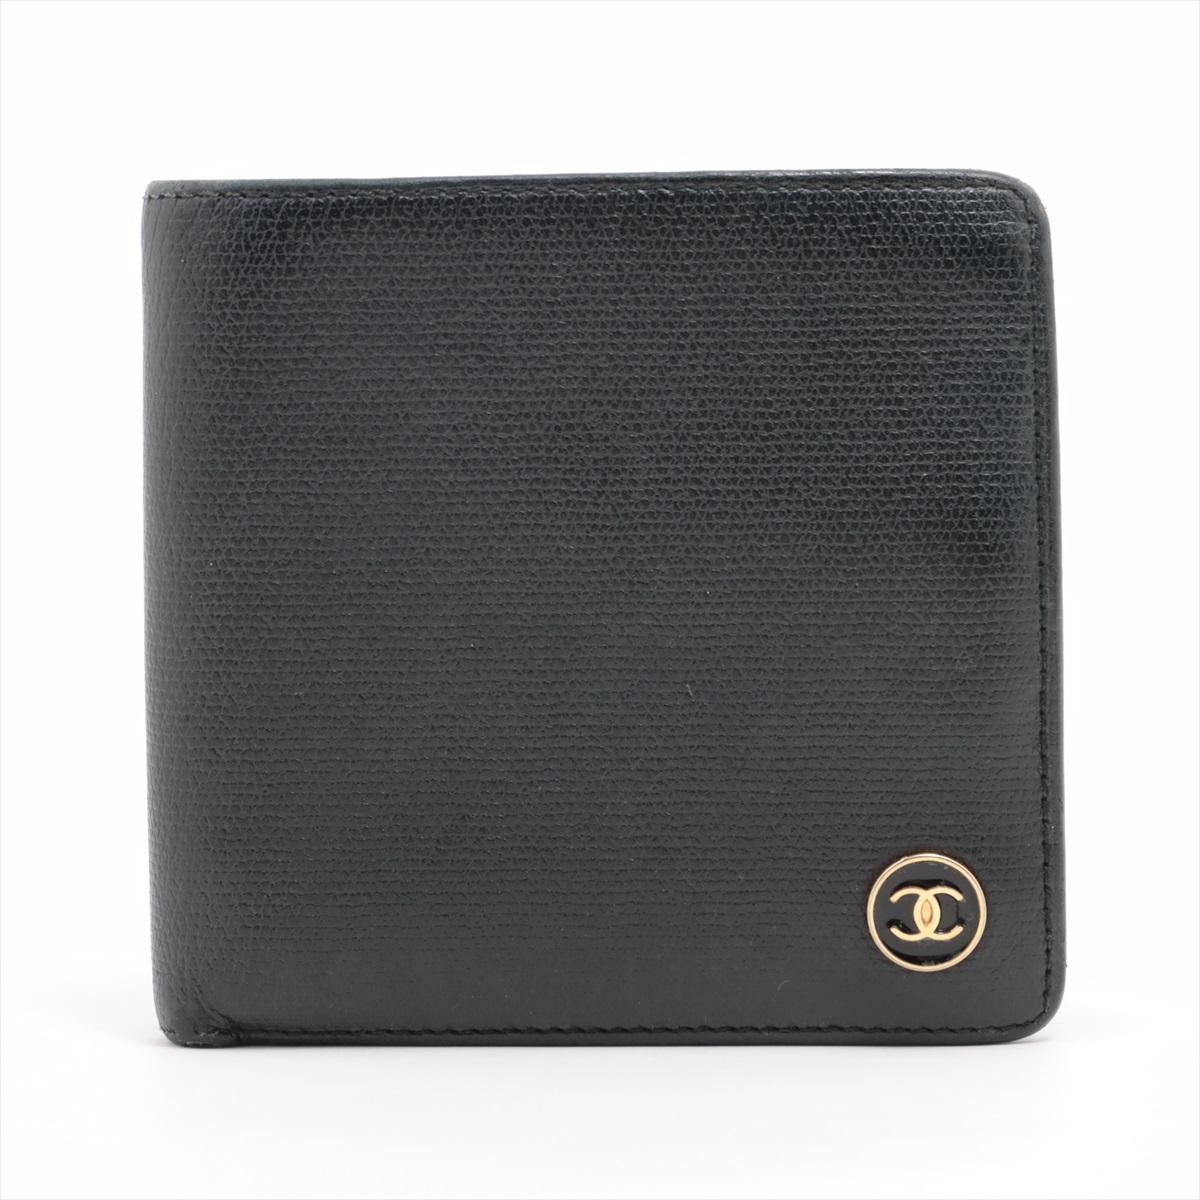 The Chanel CC Logo Button Leather Bi-fold Wallet in Black is a sophisticated and versatile accessory that exudes timeless elegance. Crafted from luxurious leather, the wallet features  iconic Chanel CC logo button, adding a touch of glamour to the